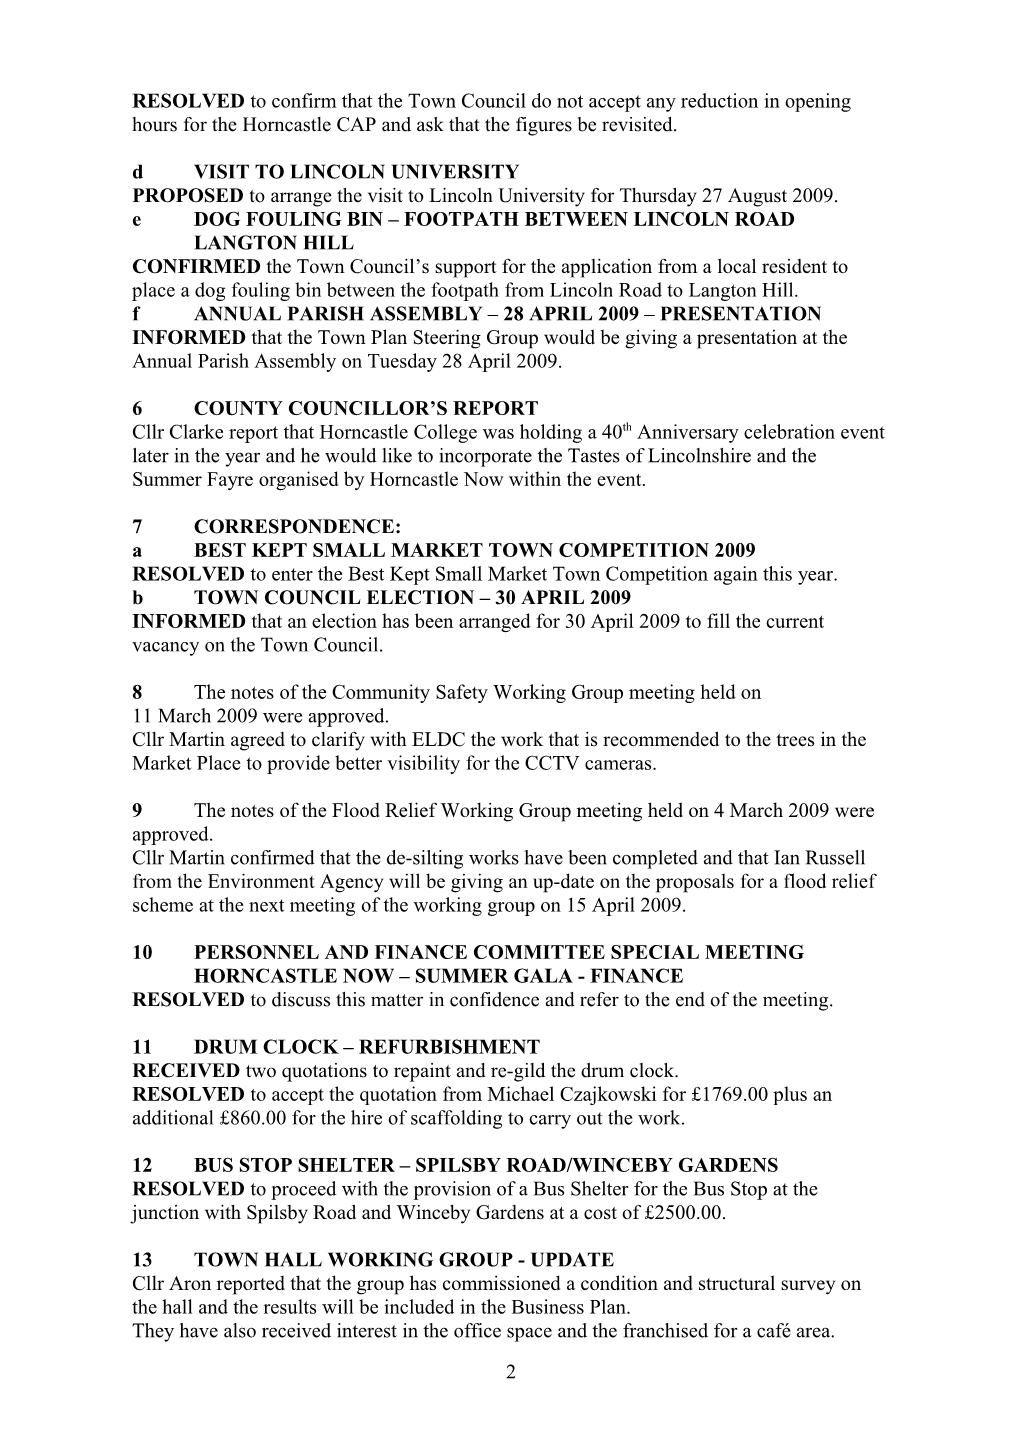 Minutes of the Meeting of Horncastle Town Council